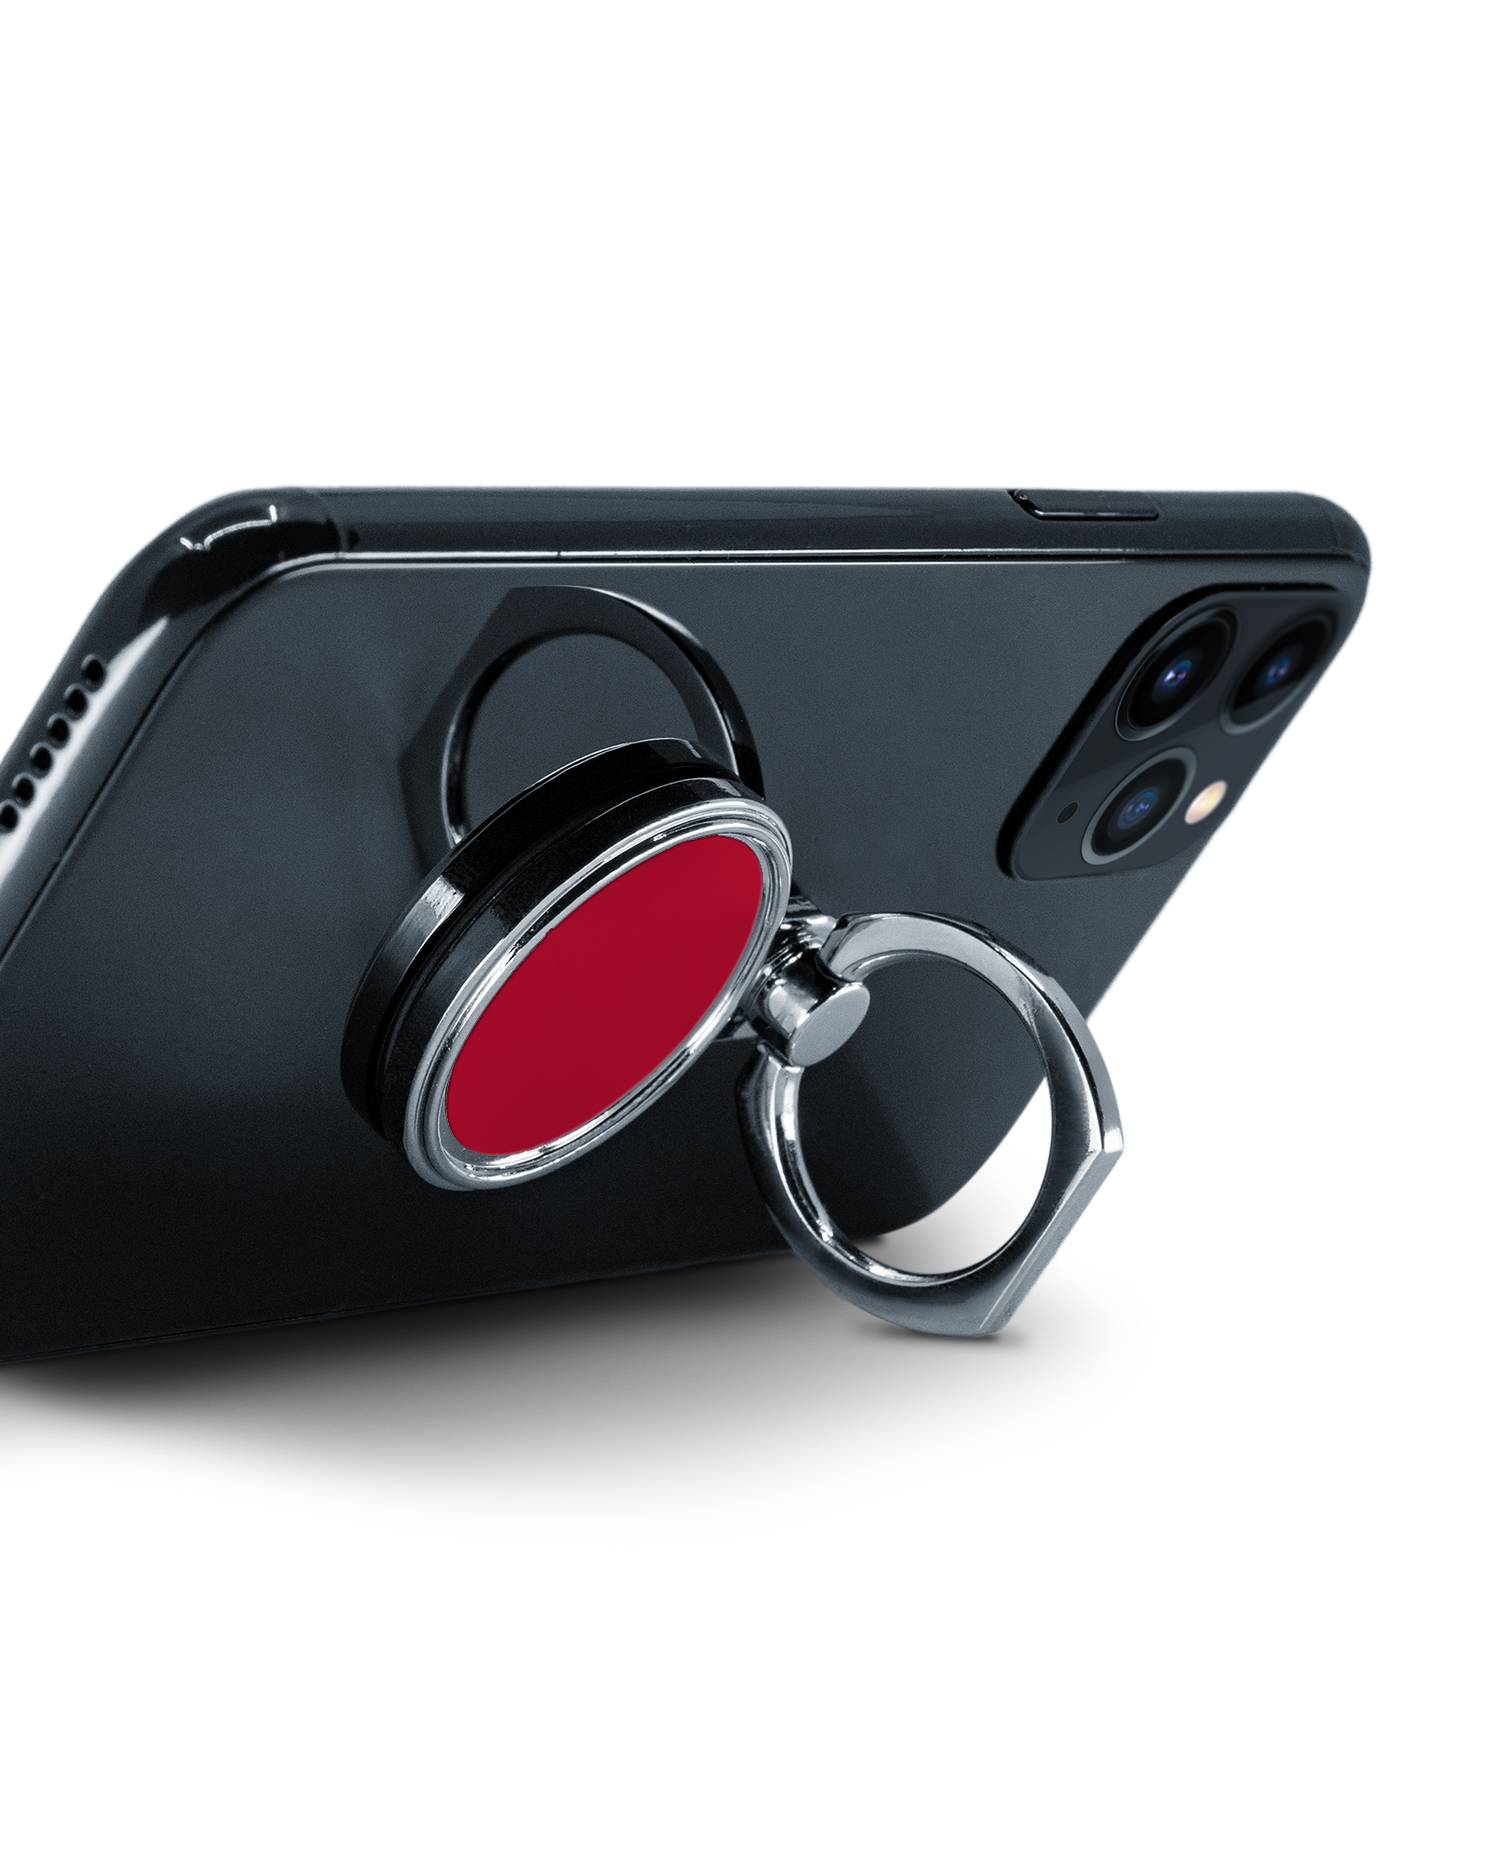 RED Ring Holder attached to a smartphone